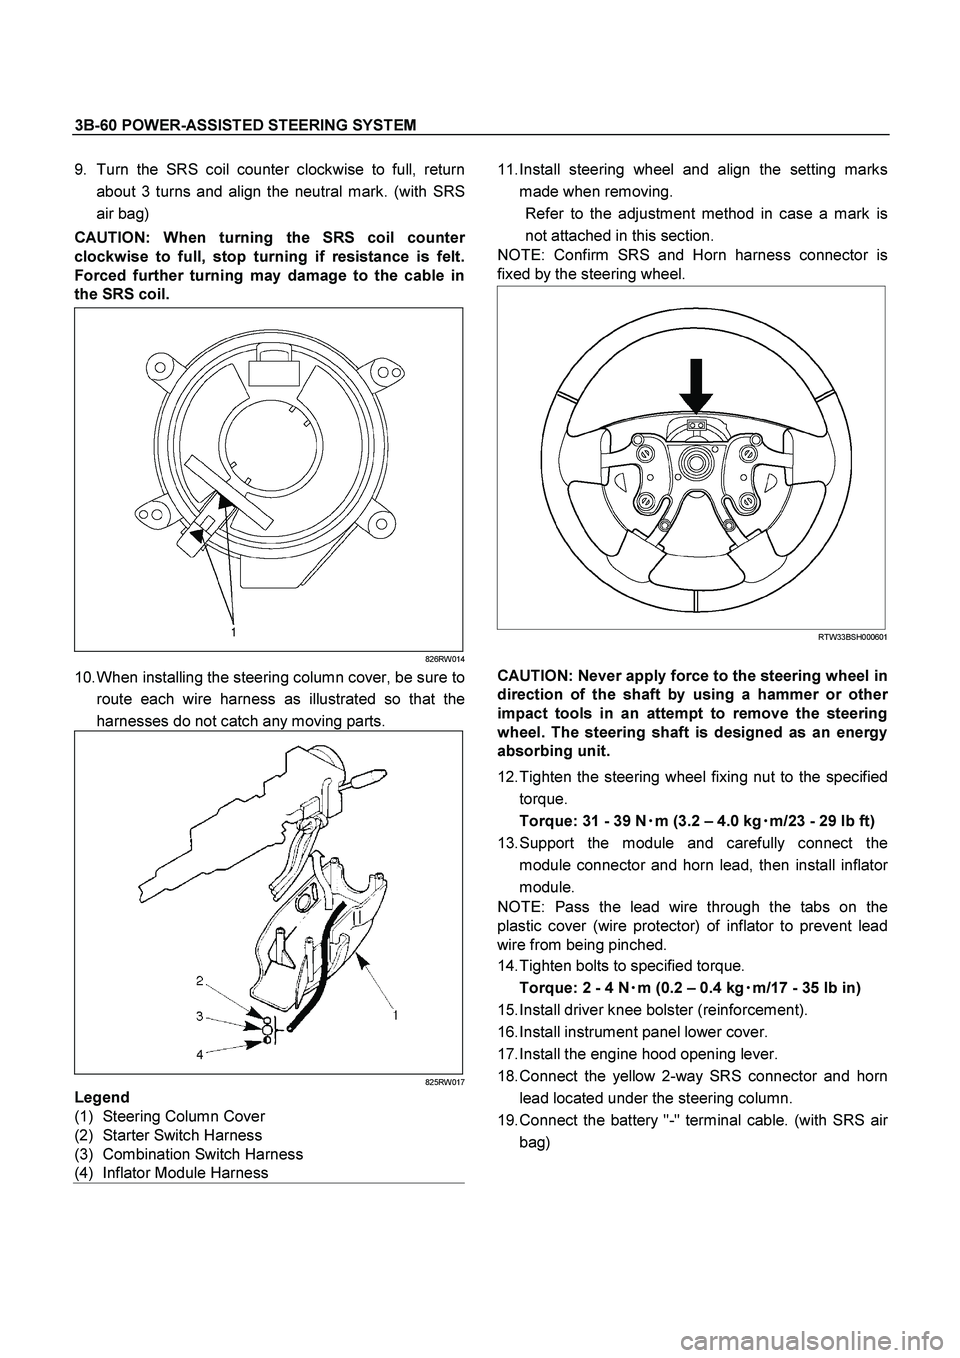 ISUZU TF SERIES 2004  Workshop Manual 3B-60 POWER-ASSISTED STEERING SYSTEM
 
9.  Turn the SRS coil counter clockwise to full, return
about 3 turns and align the neutral mark. (with SRS
air bag) 
CAUTION: When turning the SRS coil counte
r